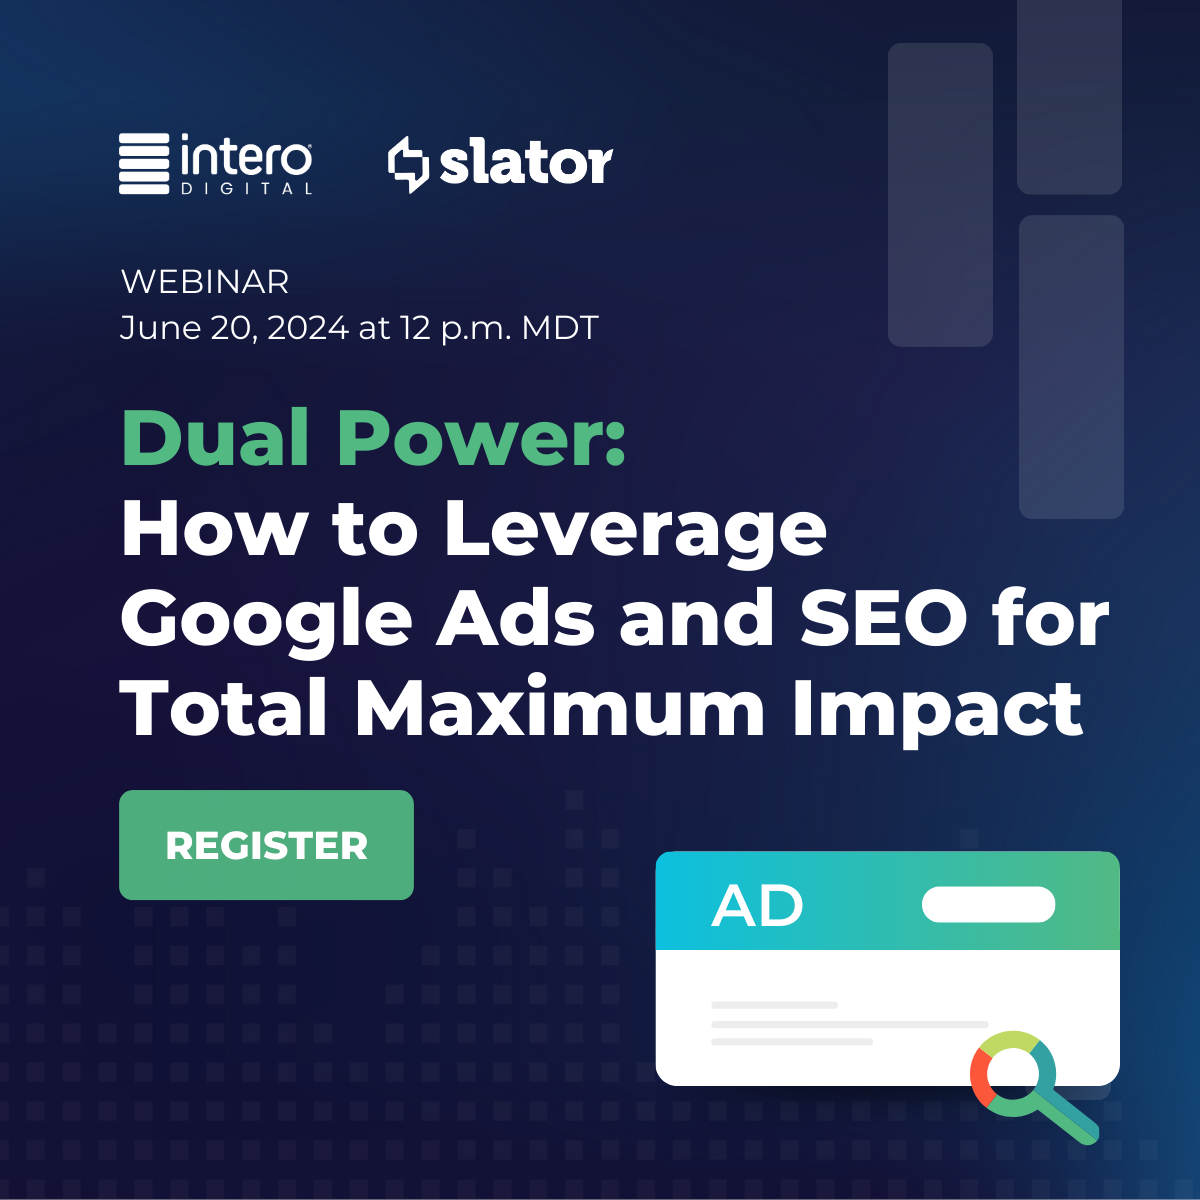 Dual Power: How to Leverage Google Ads and SEO for Total Maximum Impact